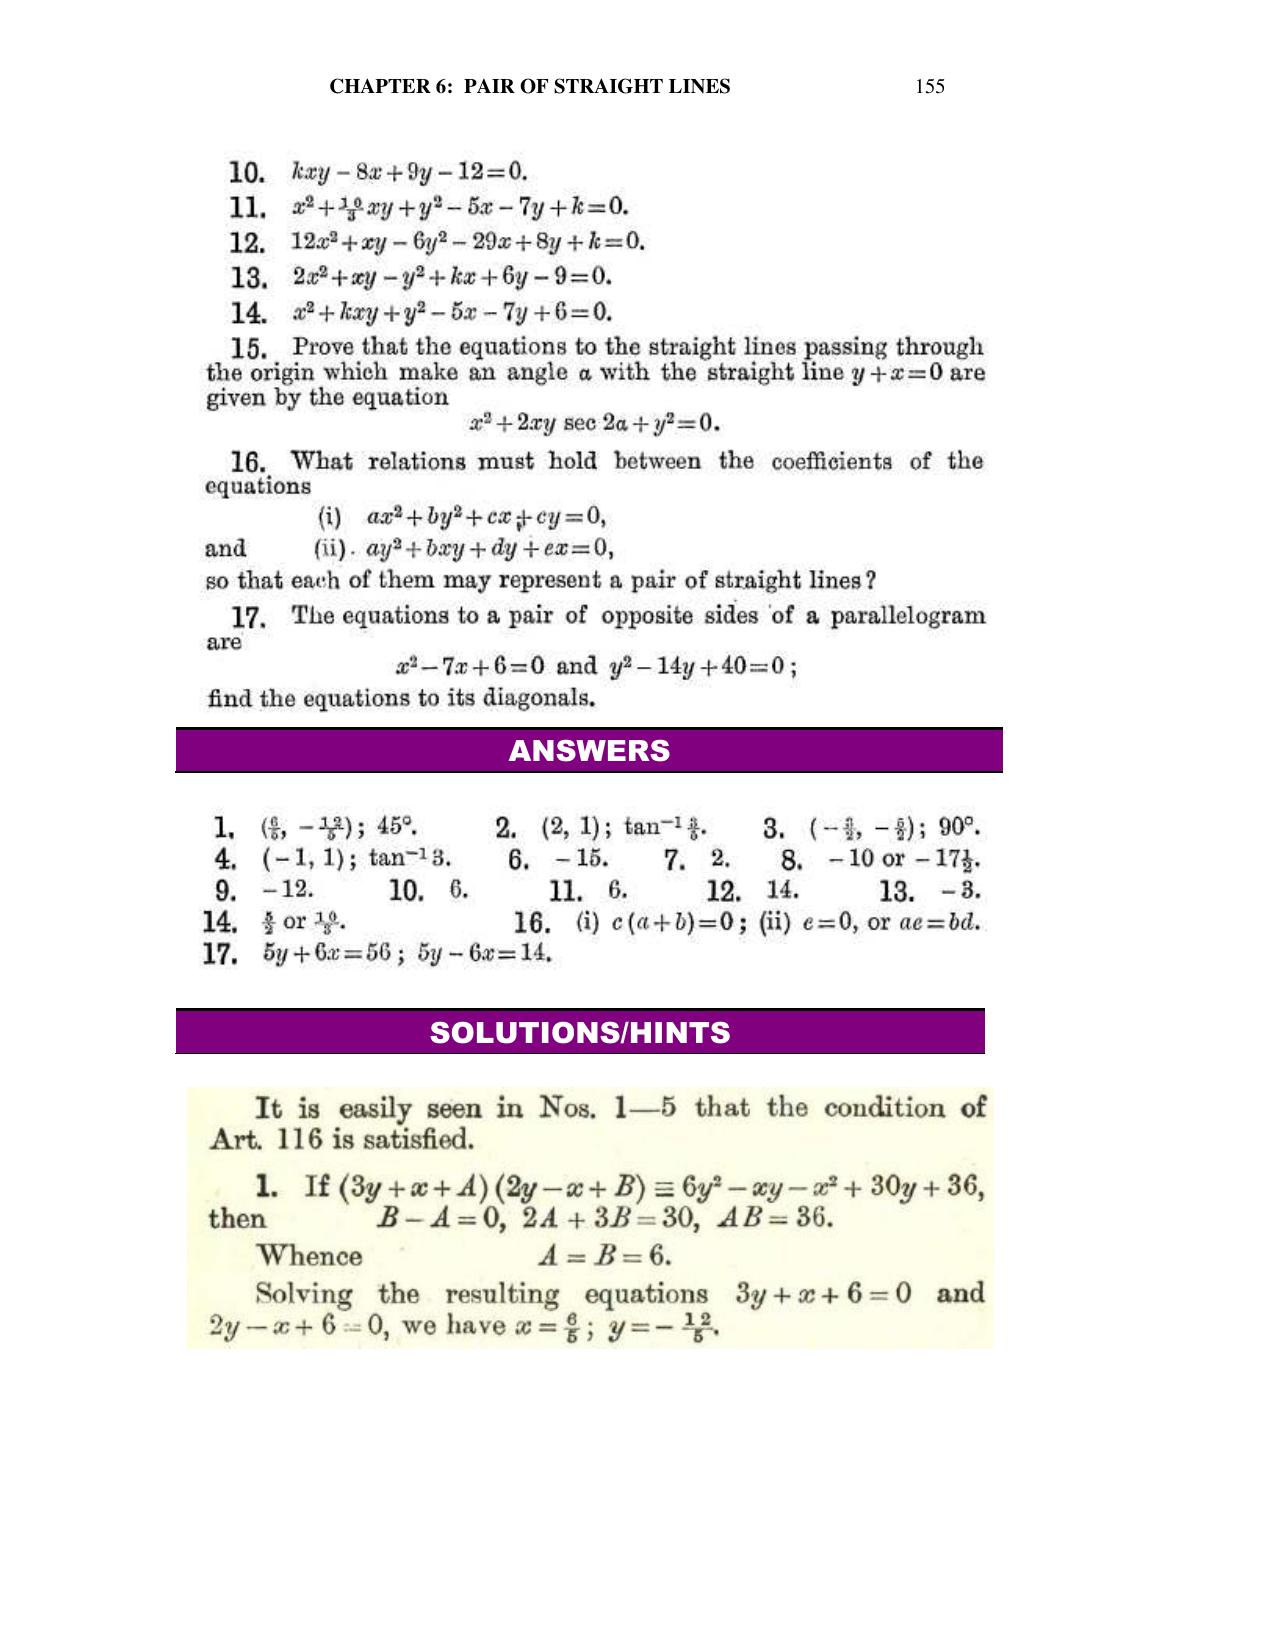 Chapter 6: On Equations Representing Two or More Straight Lines - SL Loney Solutions: The Elements of Coordinate Geometry - Page 16